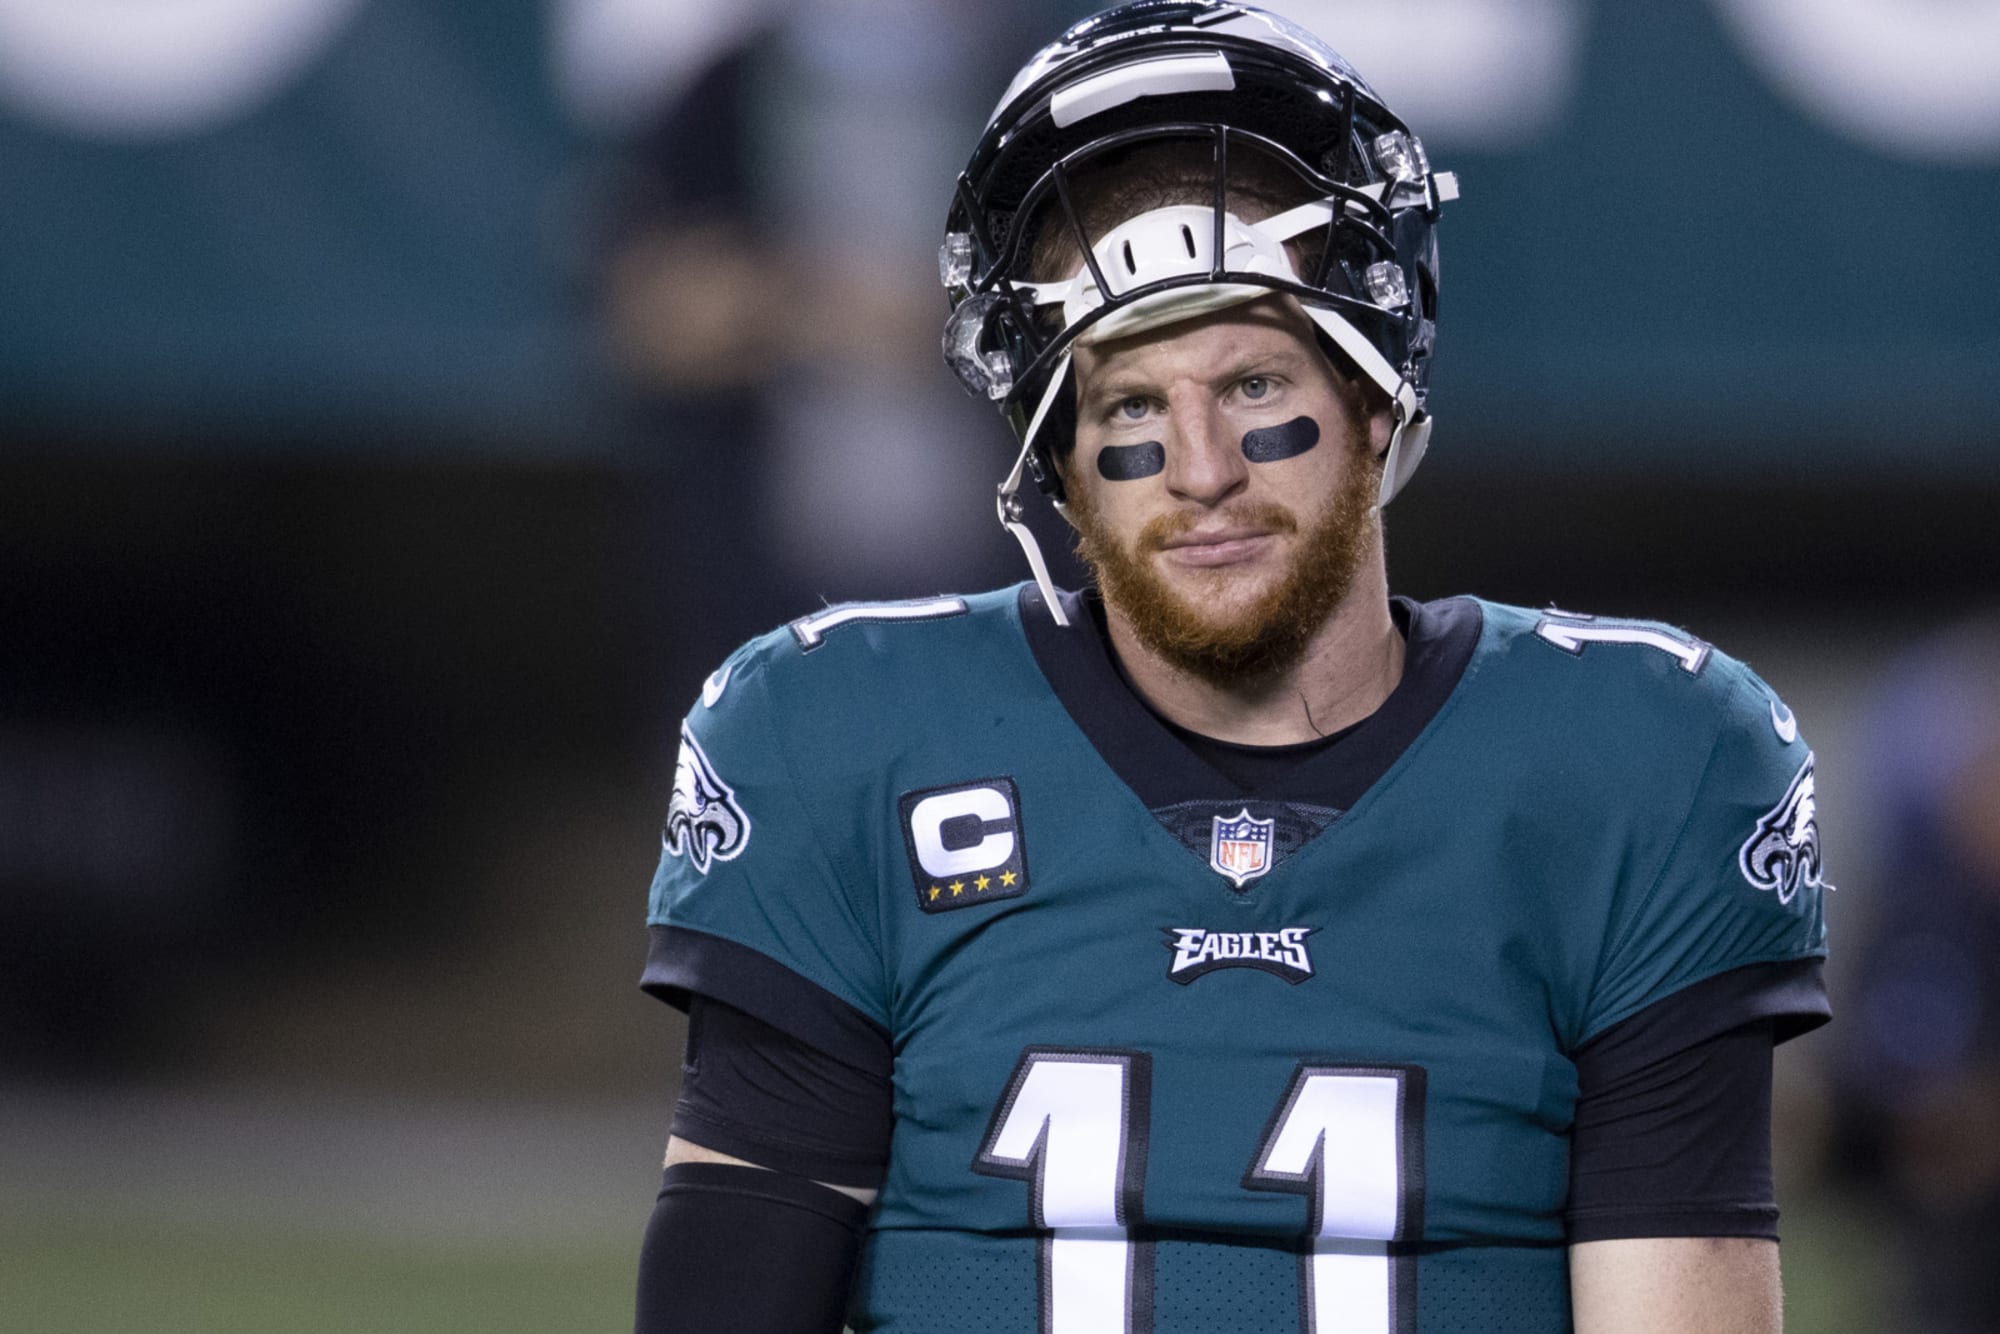 Philadelphia Eagles: The Carson Wentz trade keeps paying dividends